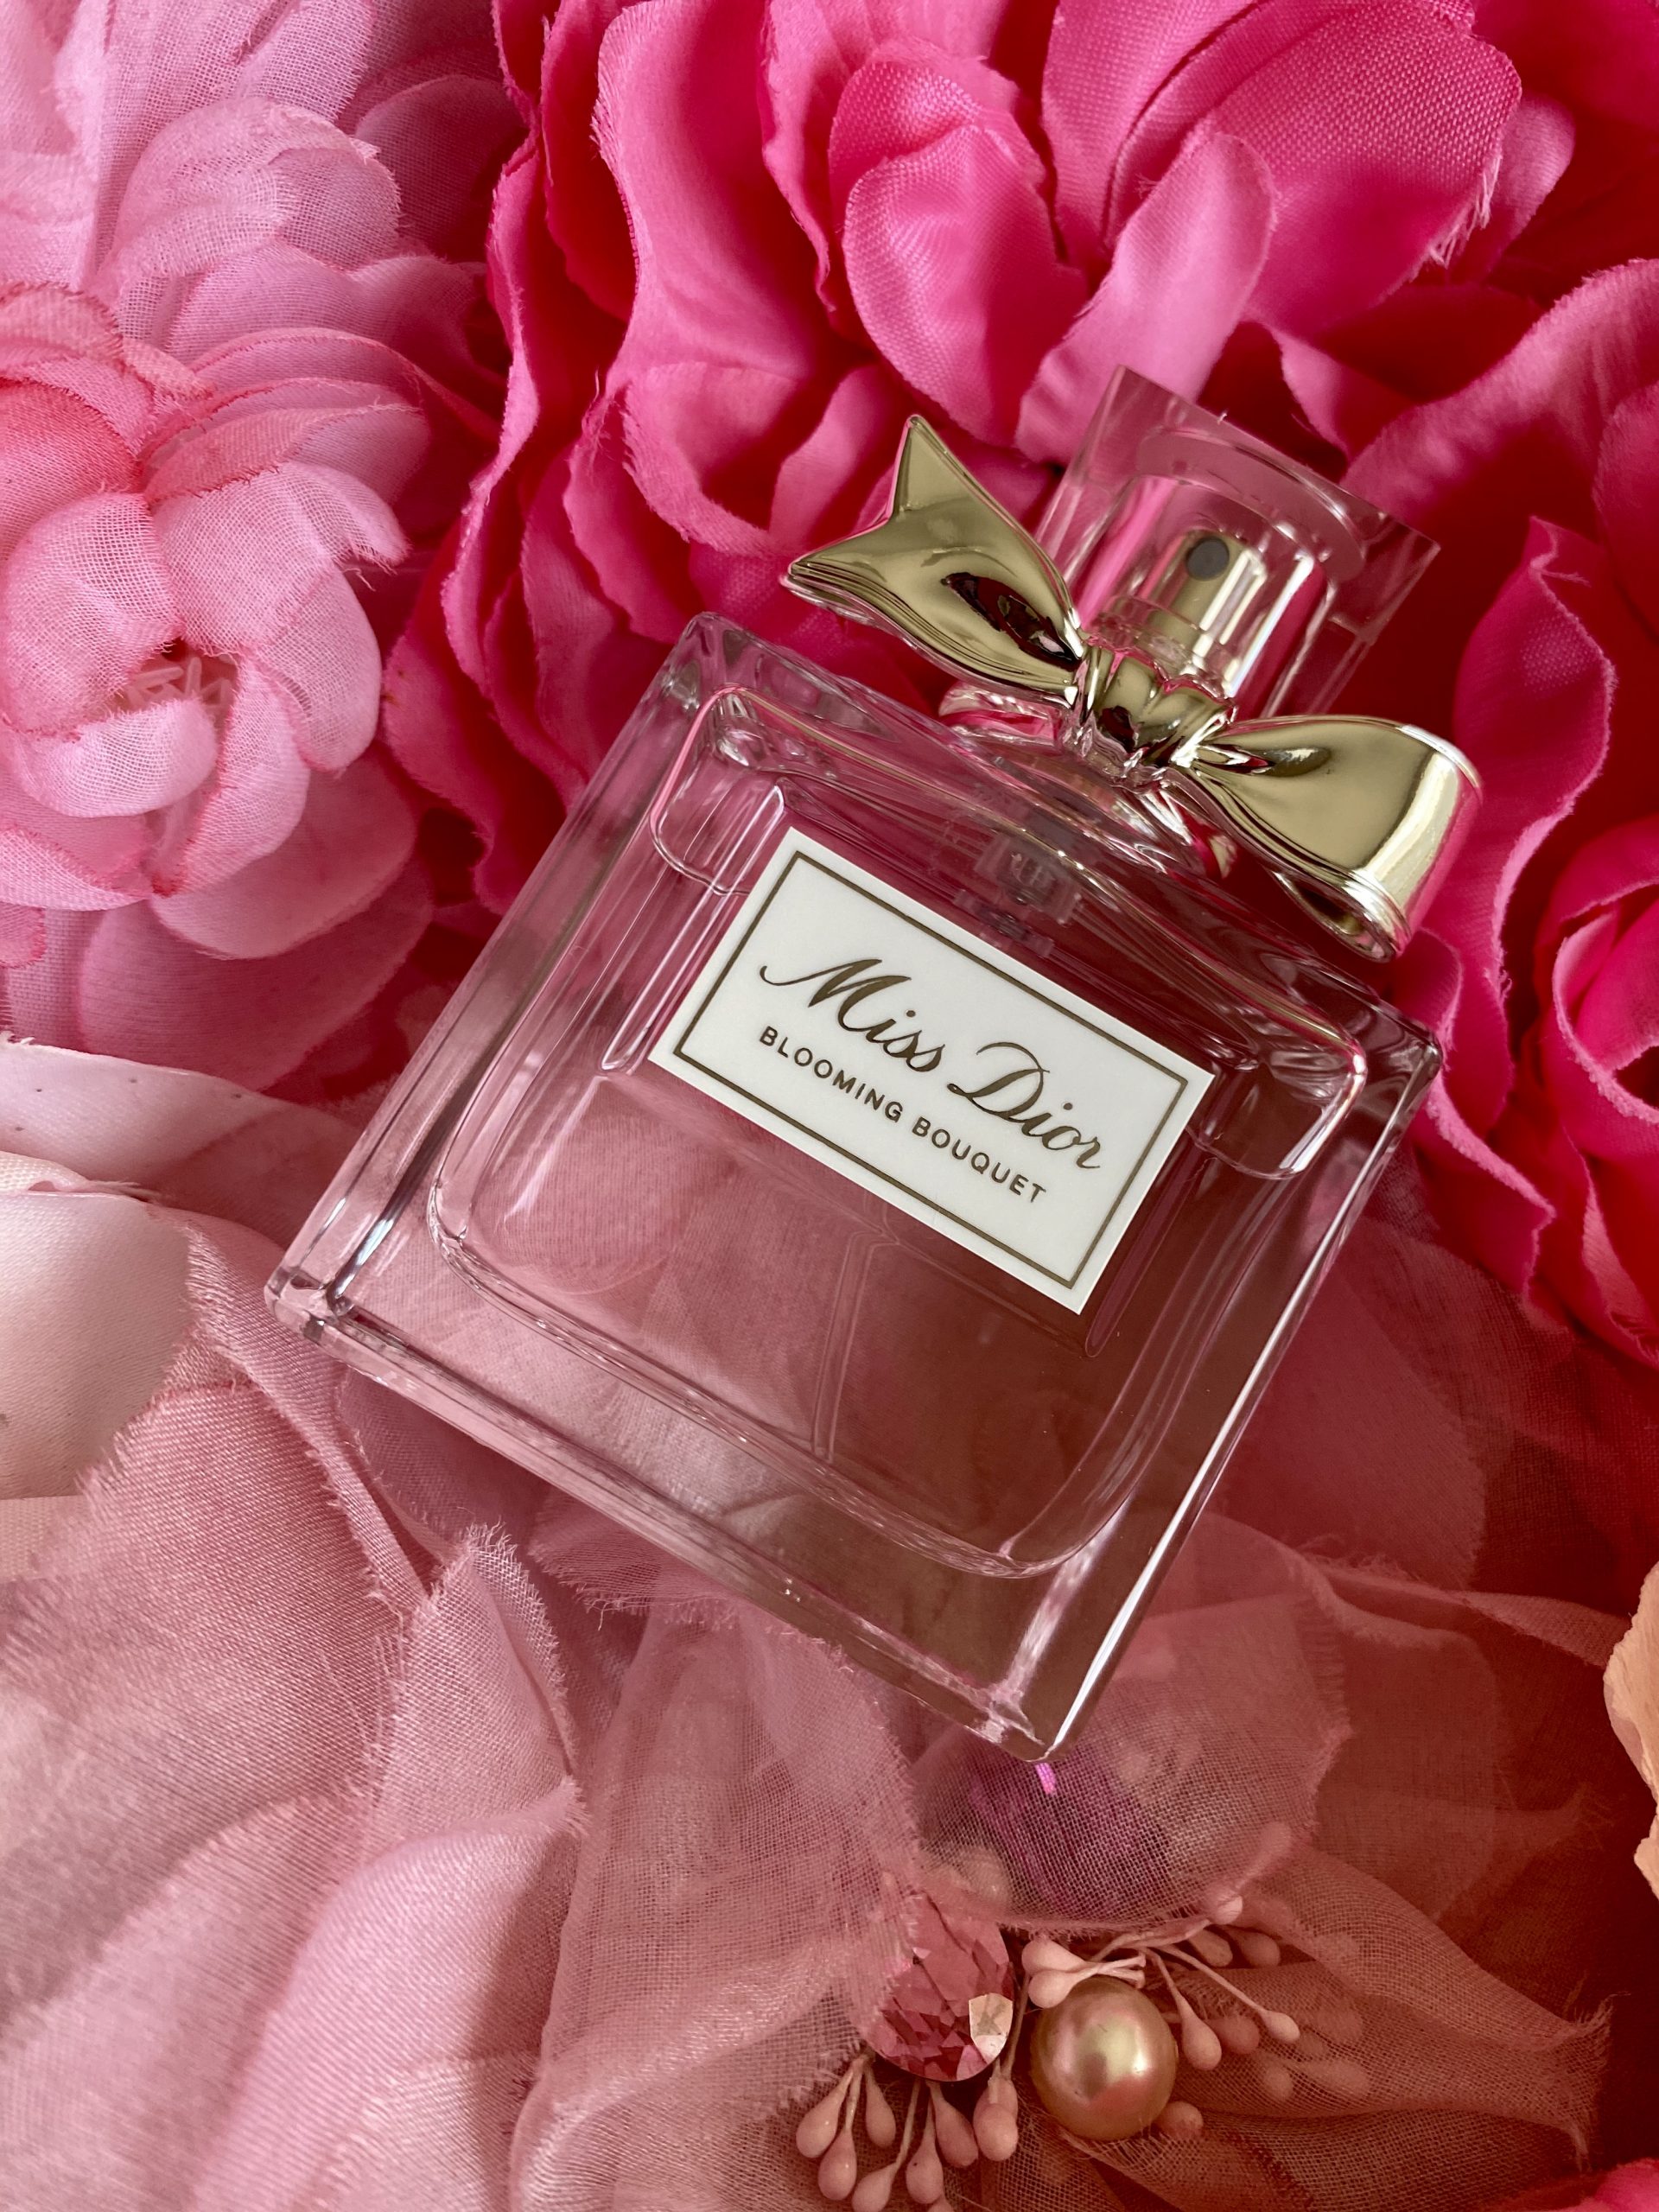 New Fragrance: Miss Dior Blooming Bouquet